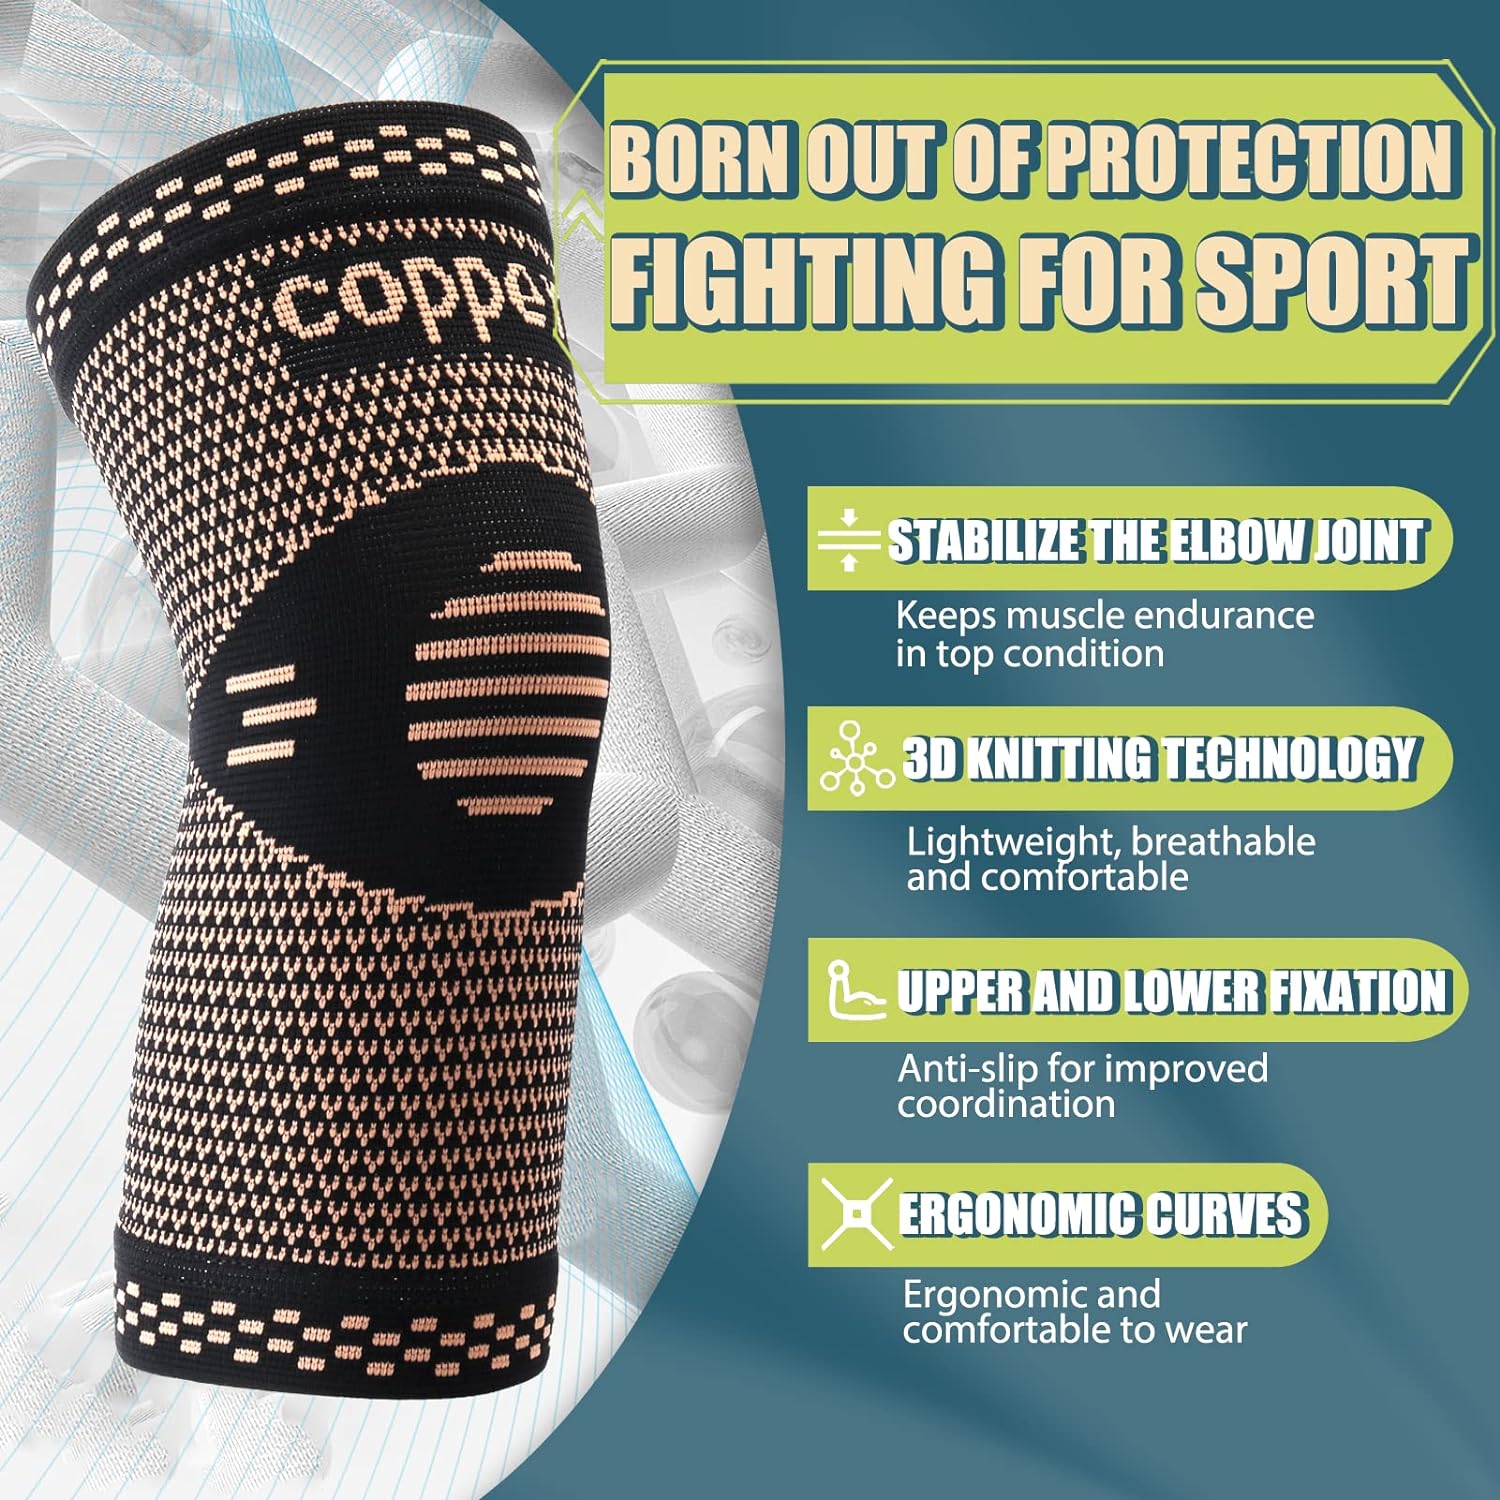 Copper Elbow Brace - Copper Infused Elbow Support Compression Sleeve, Reduces Strain  Swelling for Tendonitis, Tennis Elbow, Golf Elbow, and Elbow Pain for Men and Women, Comfortable Fabric(XL)